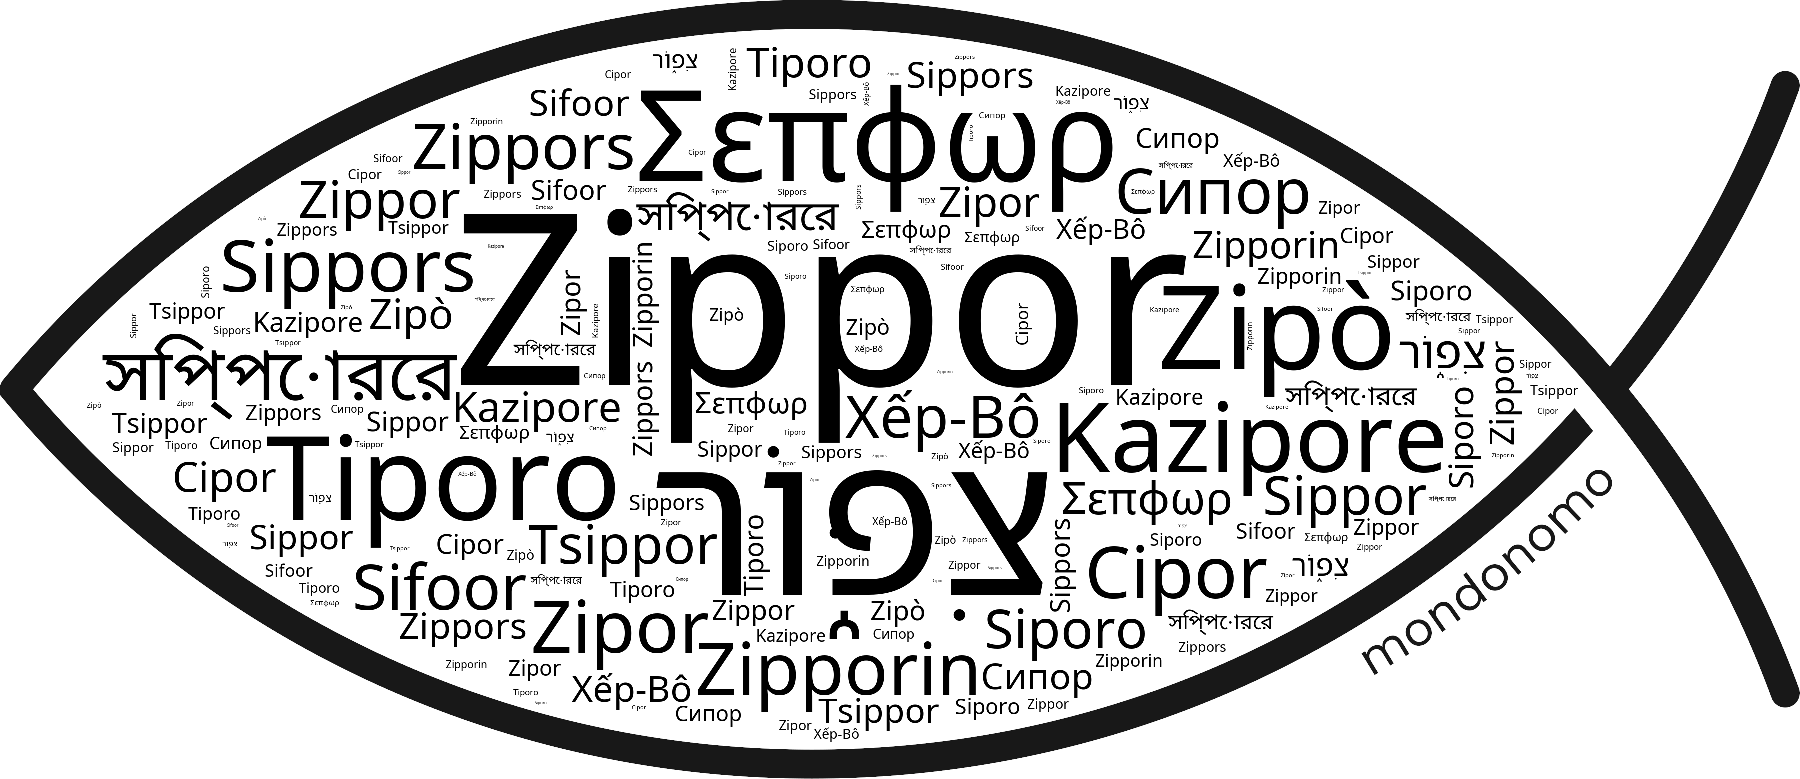 Name Zippor in the world's Bibles